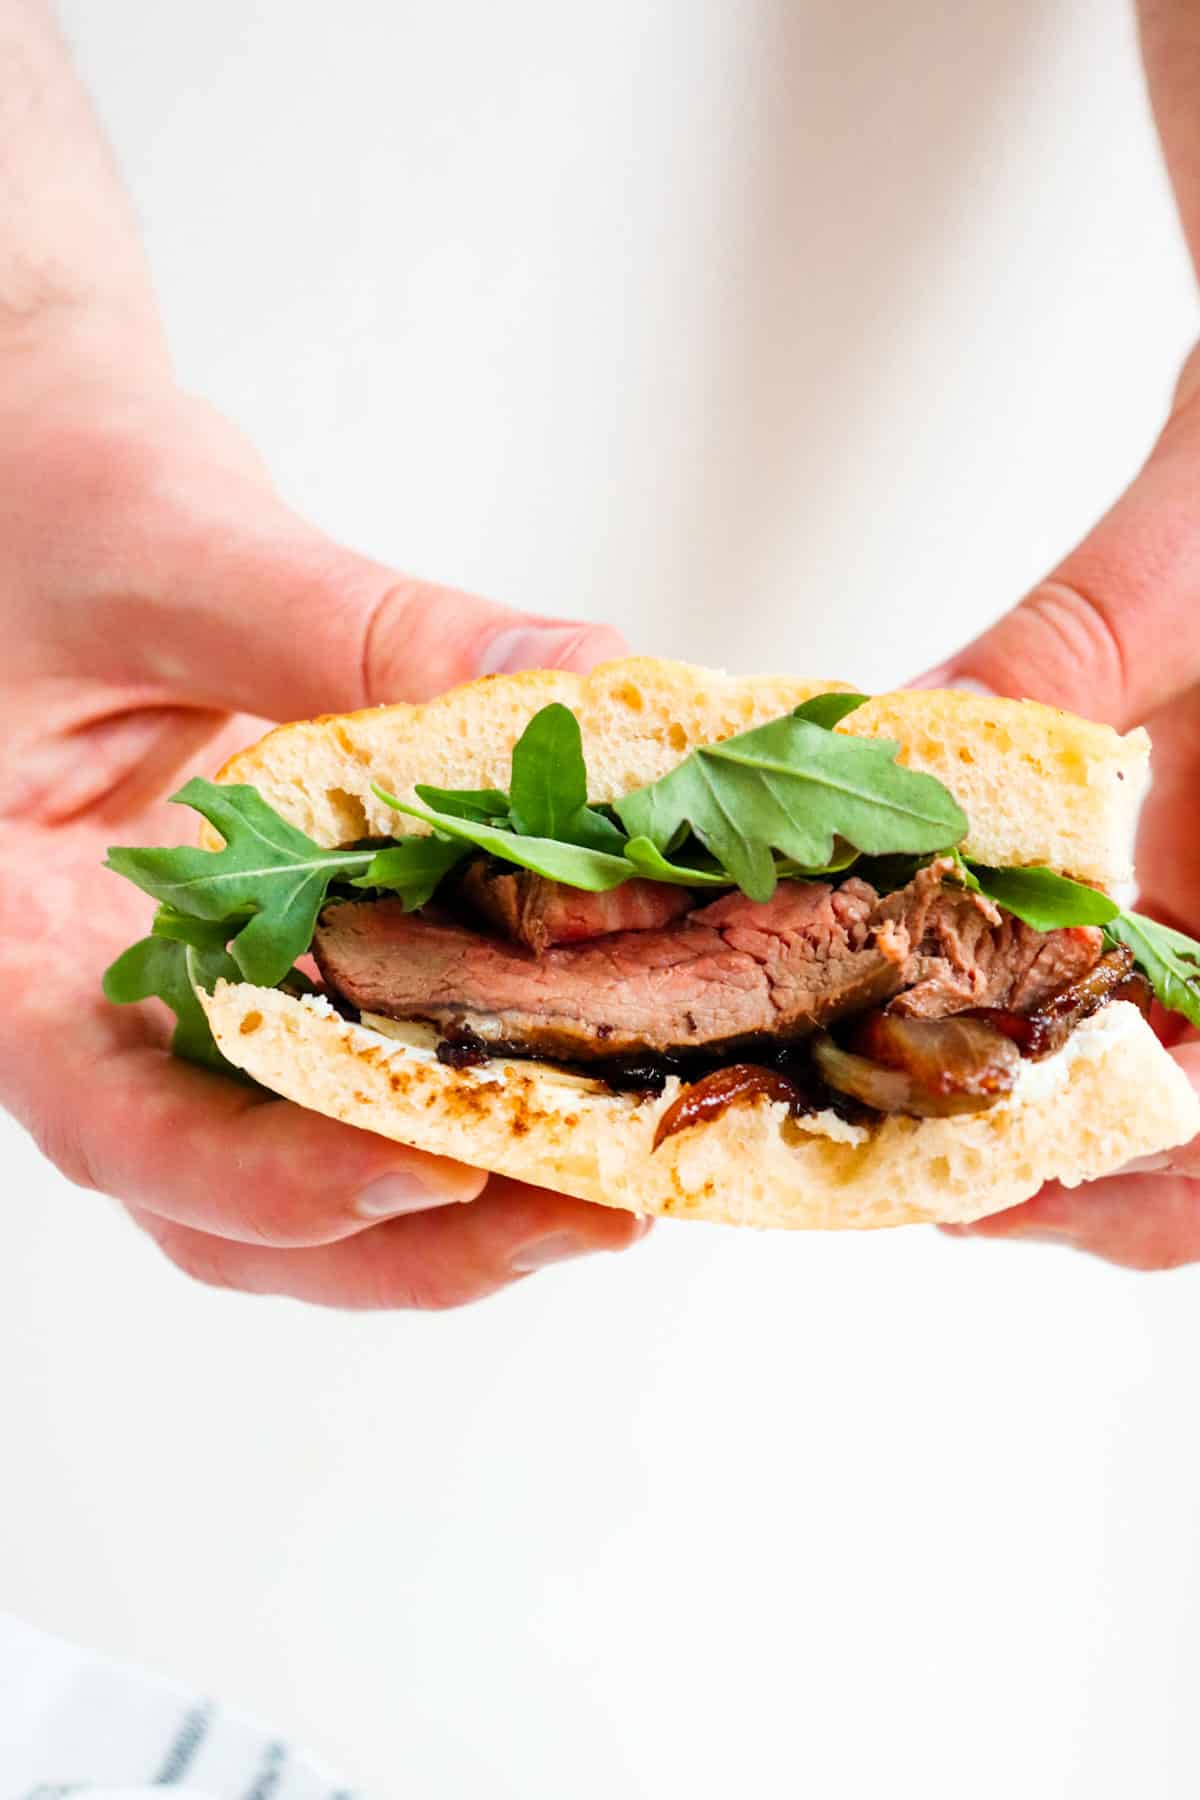 hands holding a steak sandwich with arugula leaves poking out.